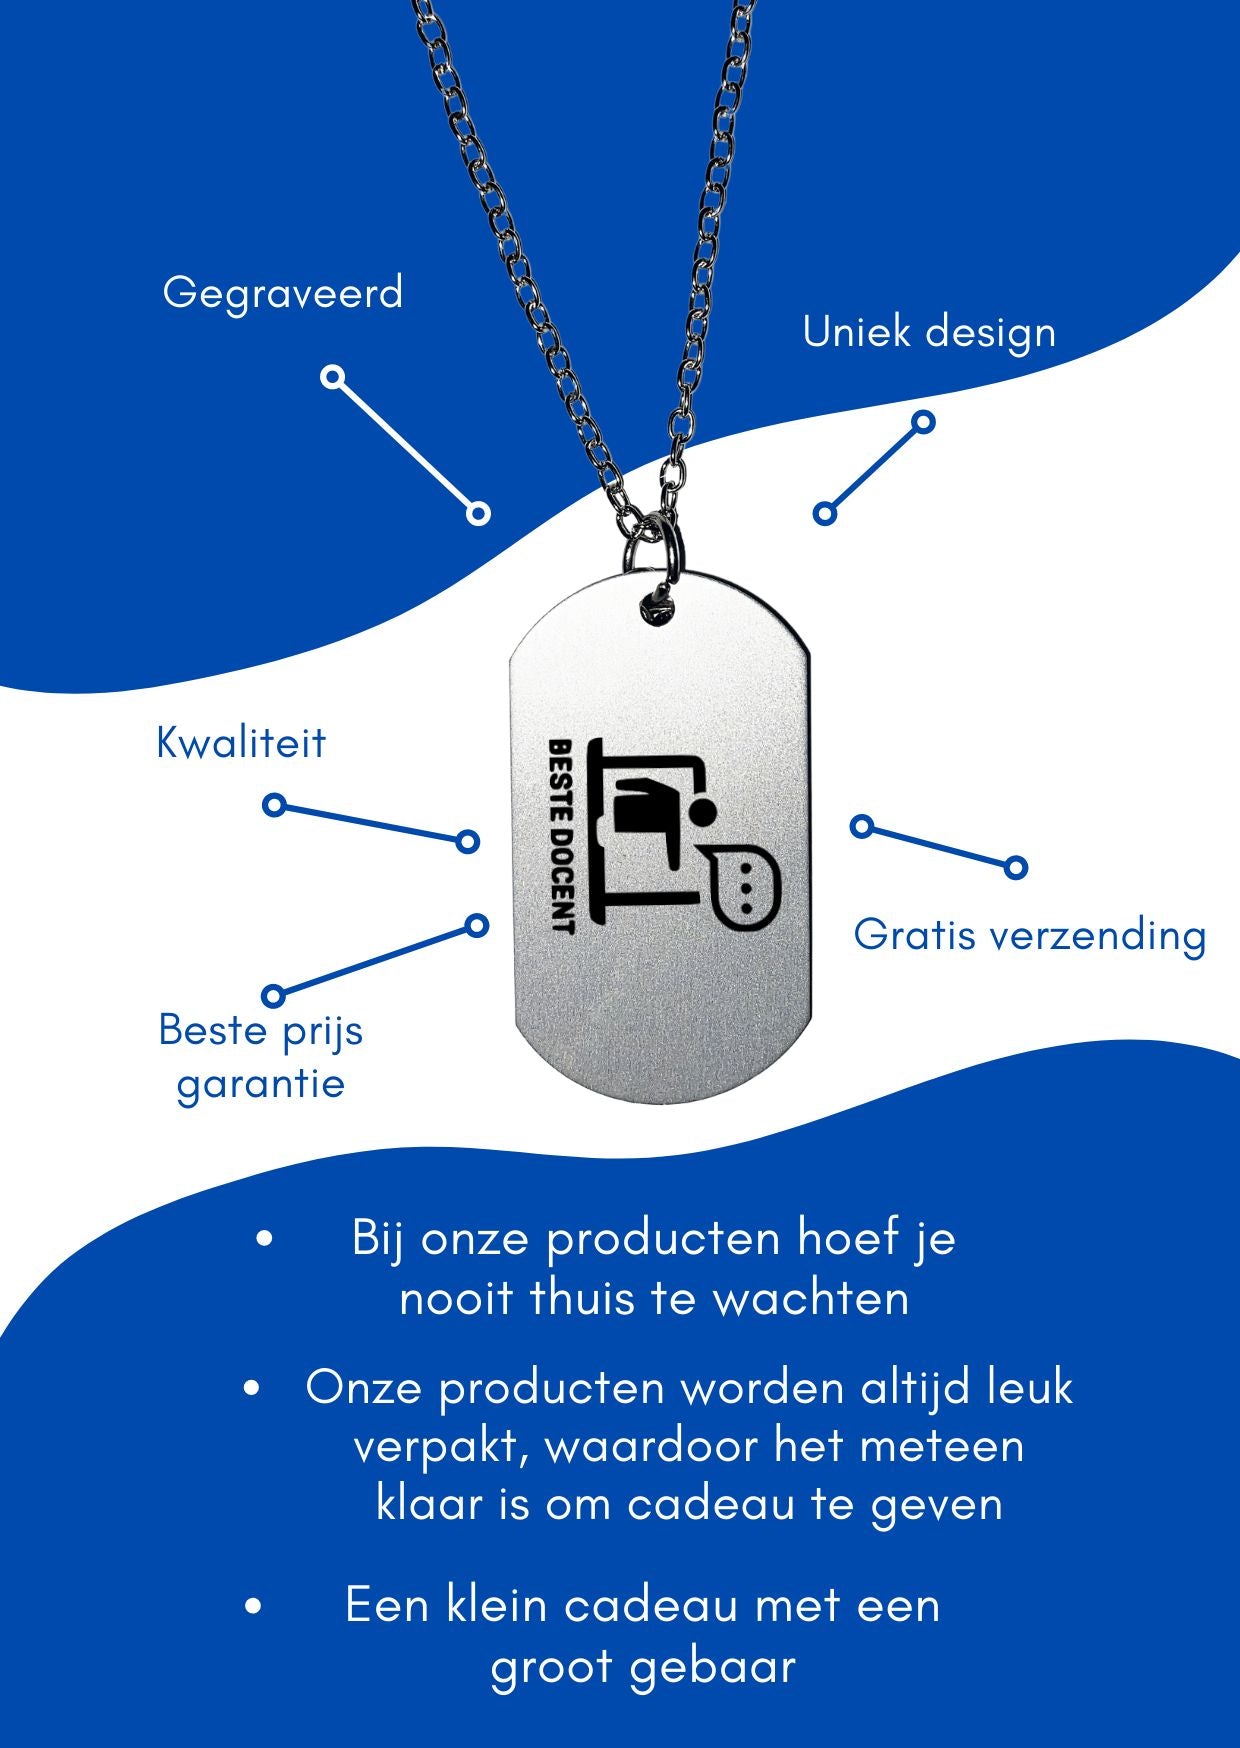 beste docent ketting